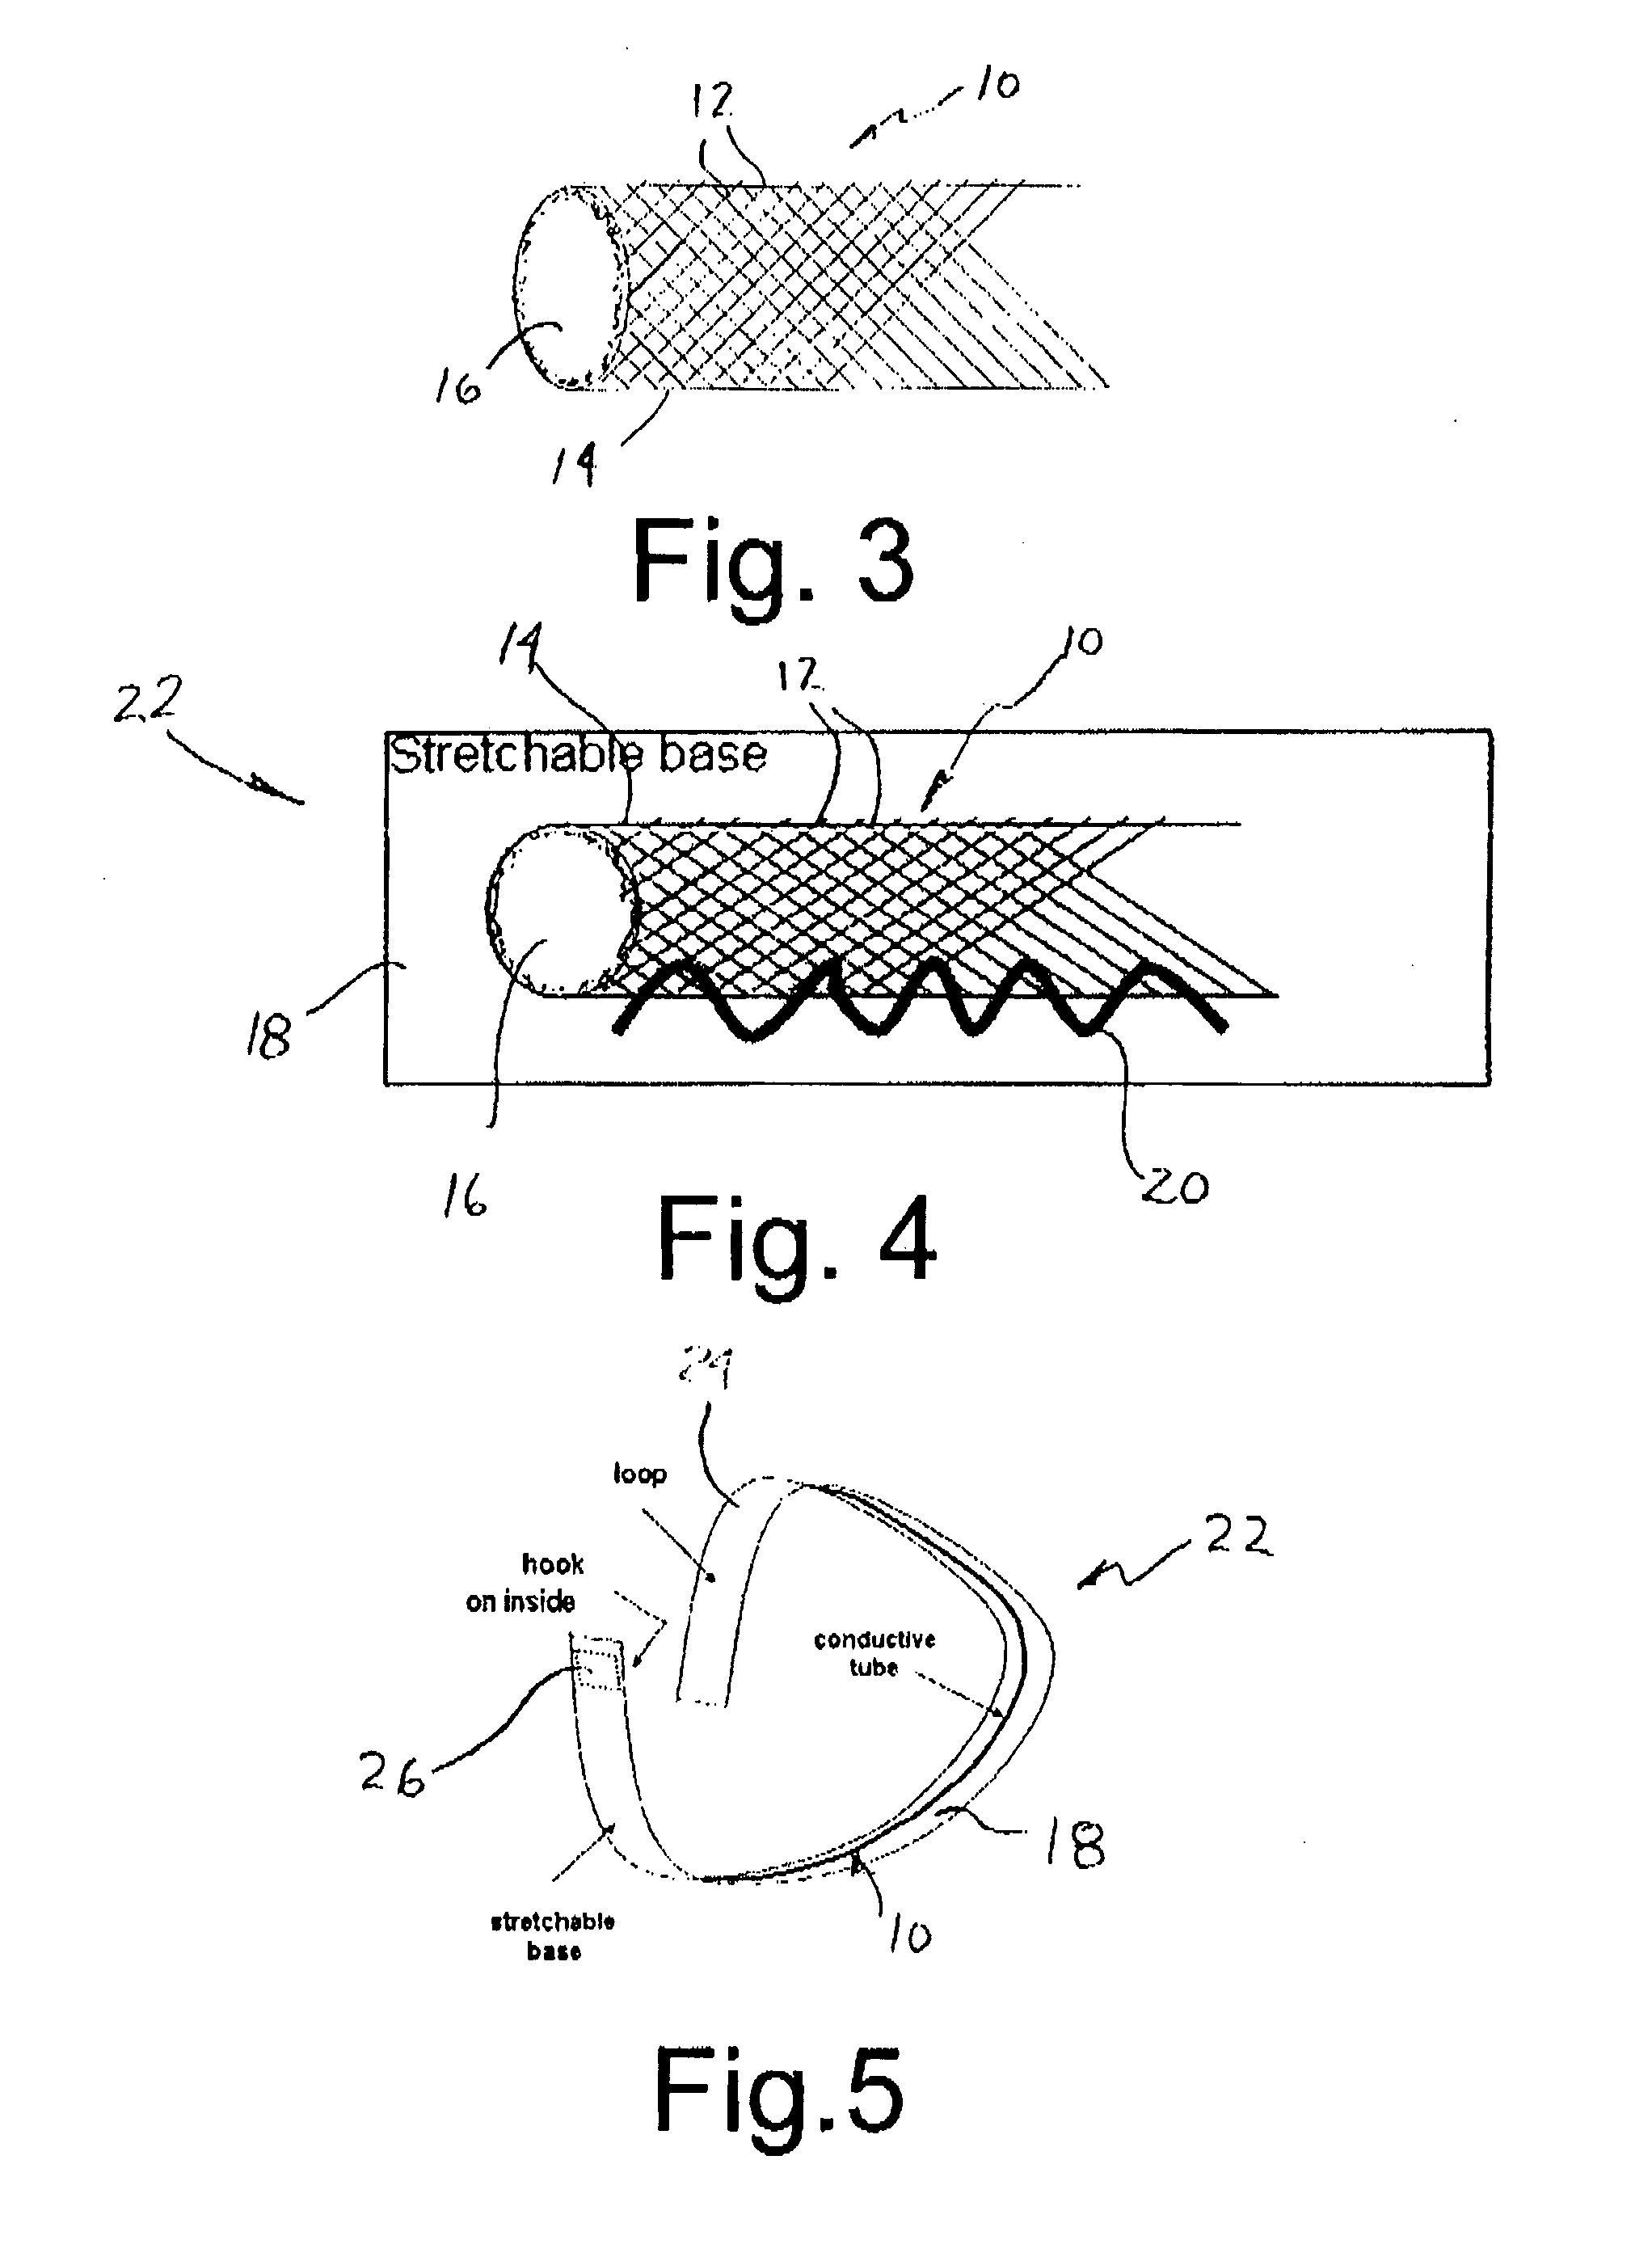 Stretchable electrode and method of making physiologic measurements